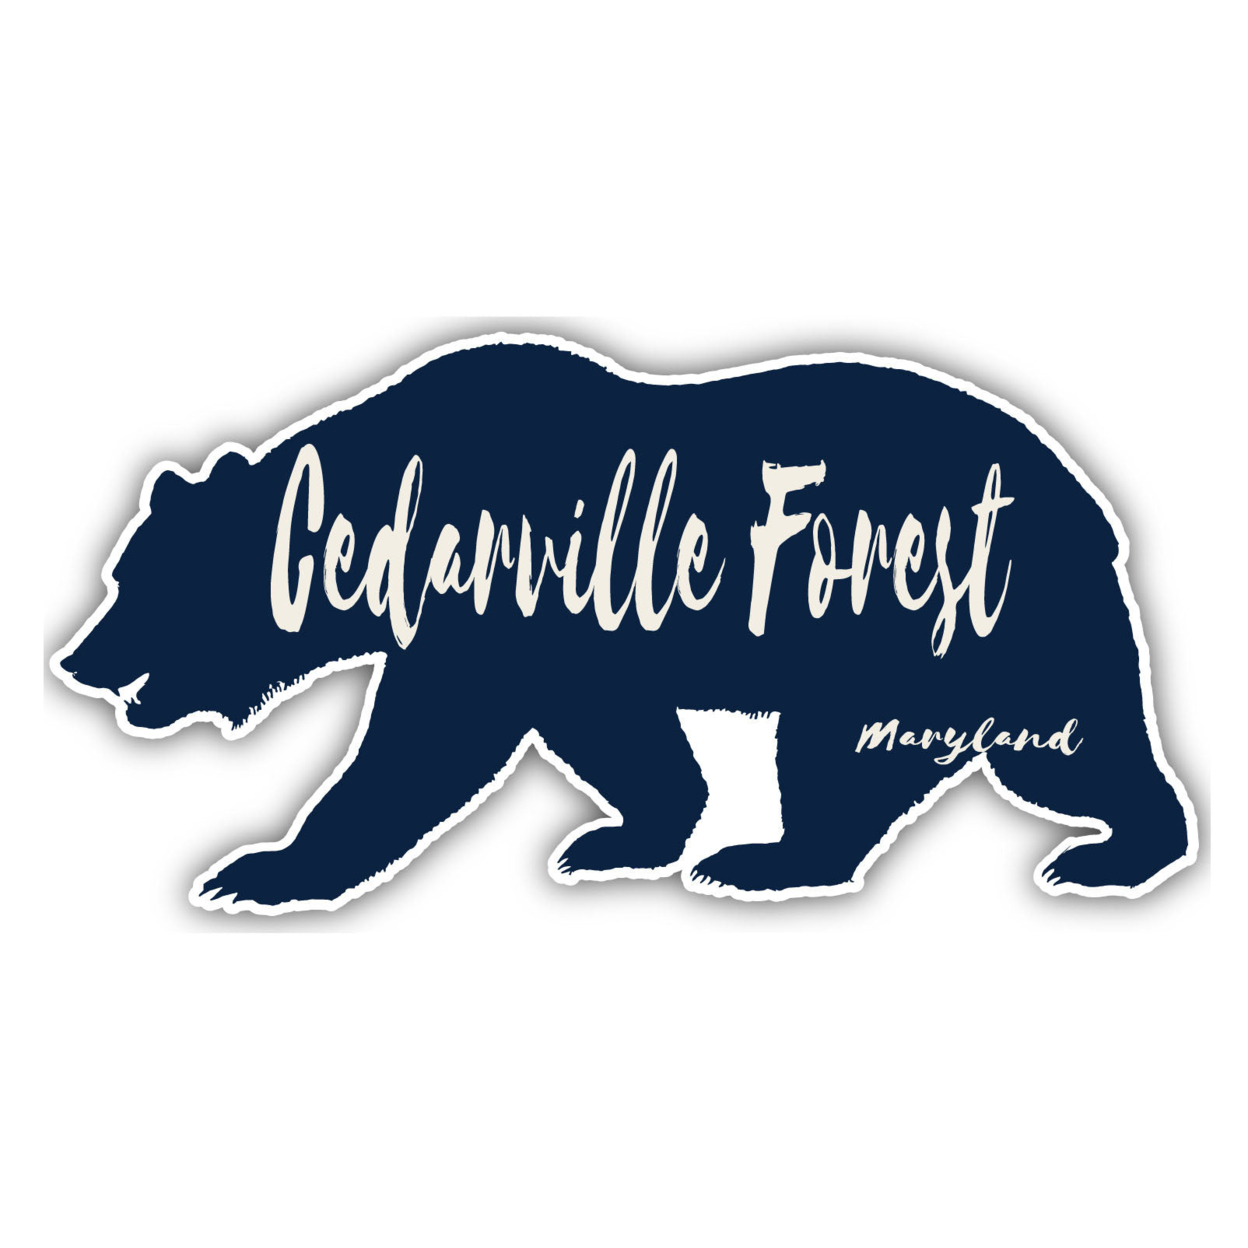 Cedarville Forest Maryland Souvenir Decorative Stickers (Choose Theme And Size) - 4-Pack, 10-Inch, Bear